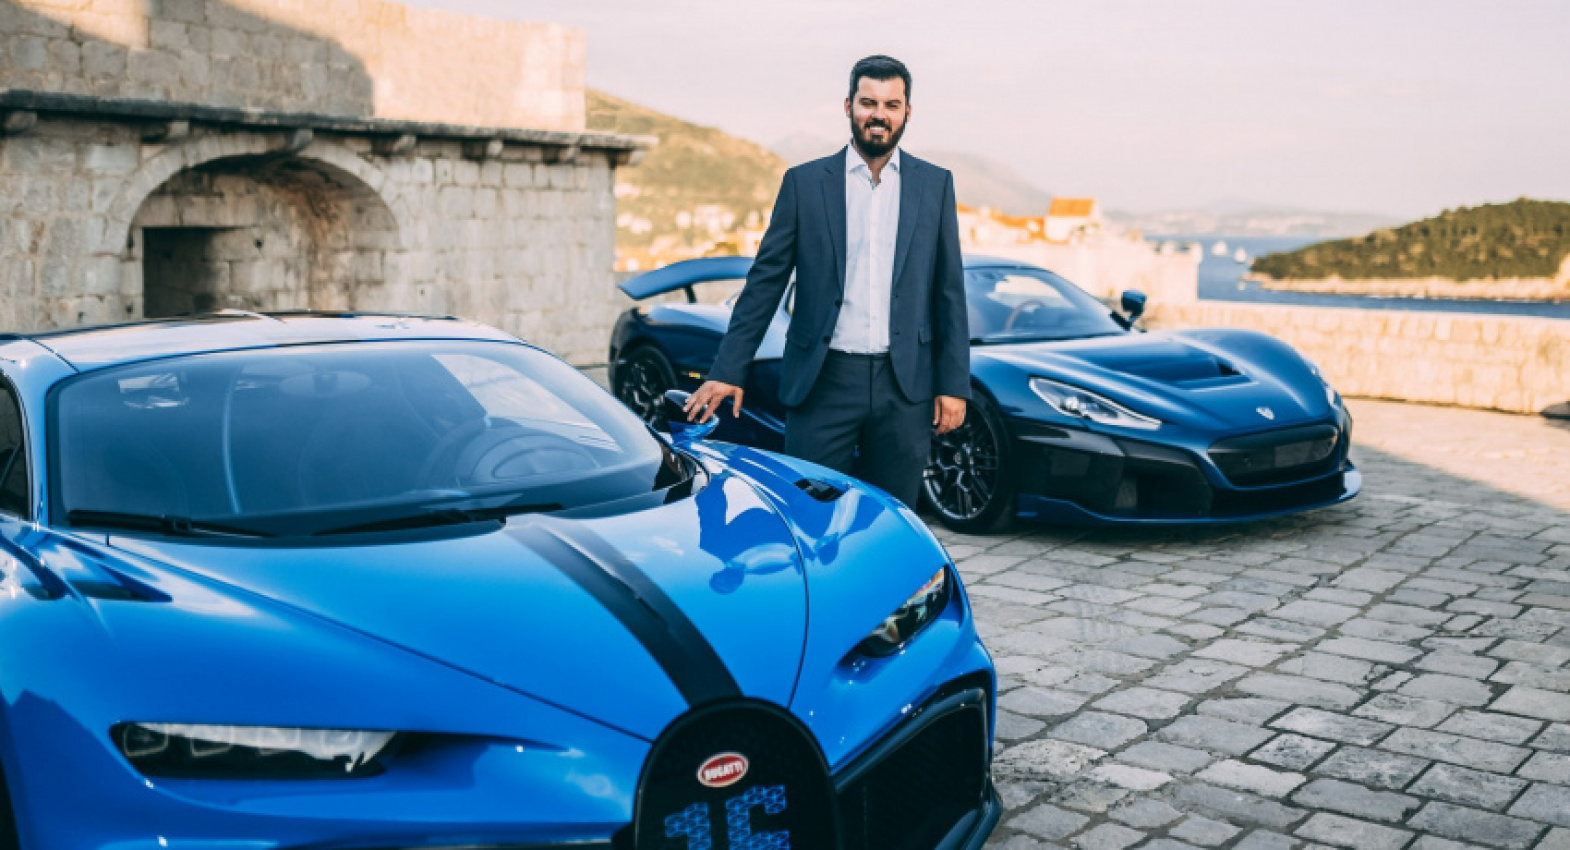 autos, bugatti, cars, news, electric vehicles, reports, rimac, rimac nevera, supercar, mate rimac details the future of bugatti and sounds like the car guy the brand deserves